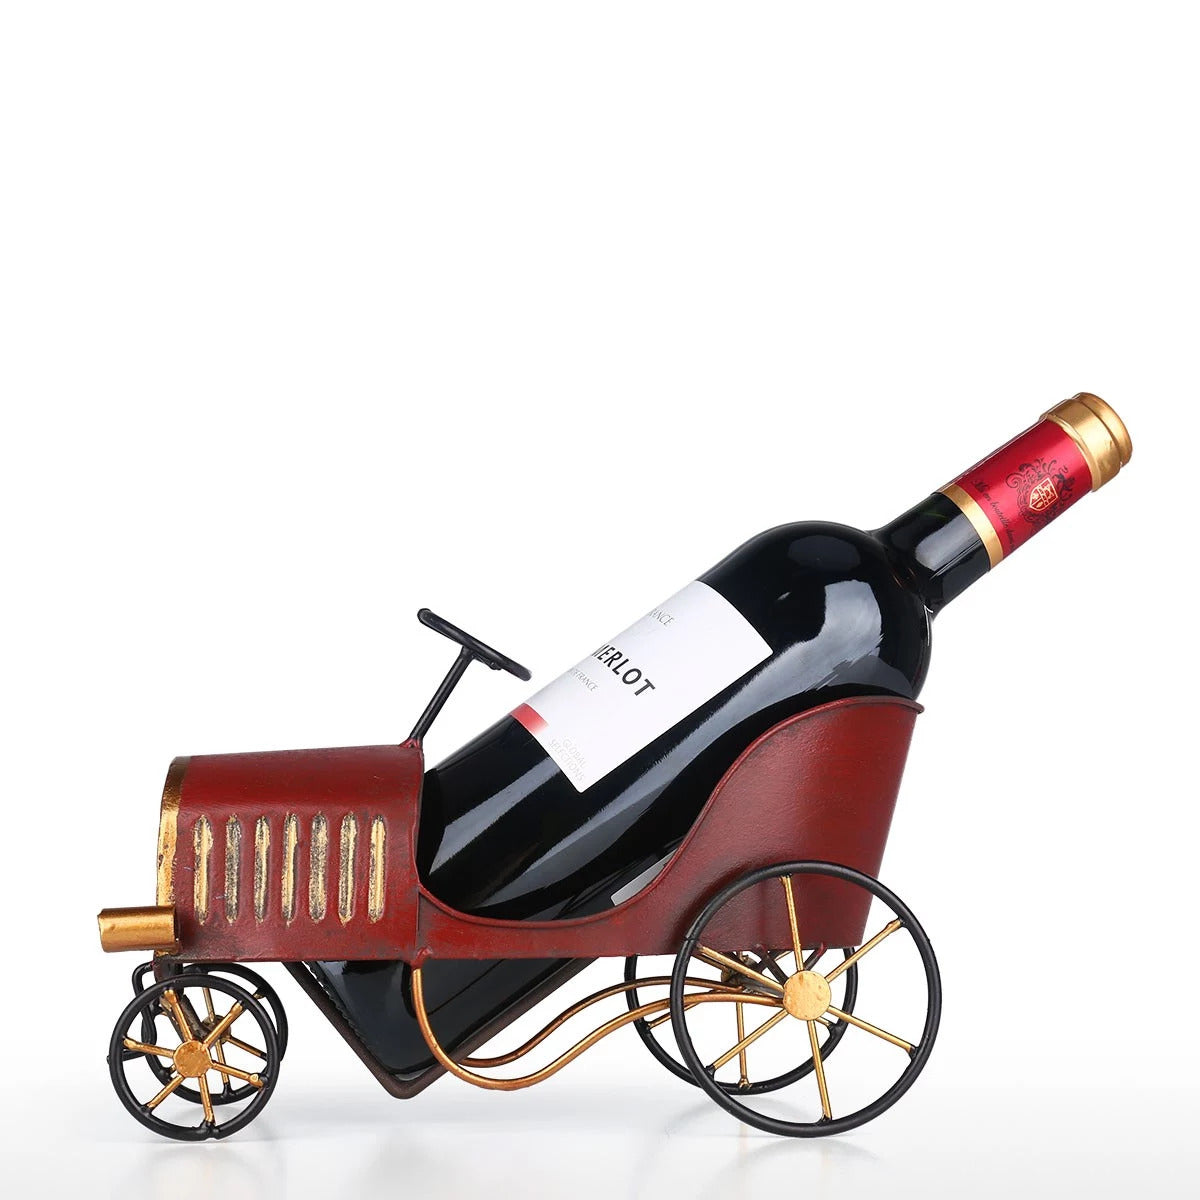 Gifts For Wine Lovers as Wine Bottle Holder